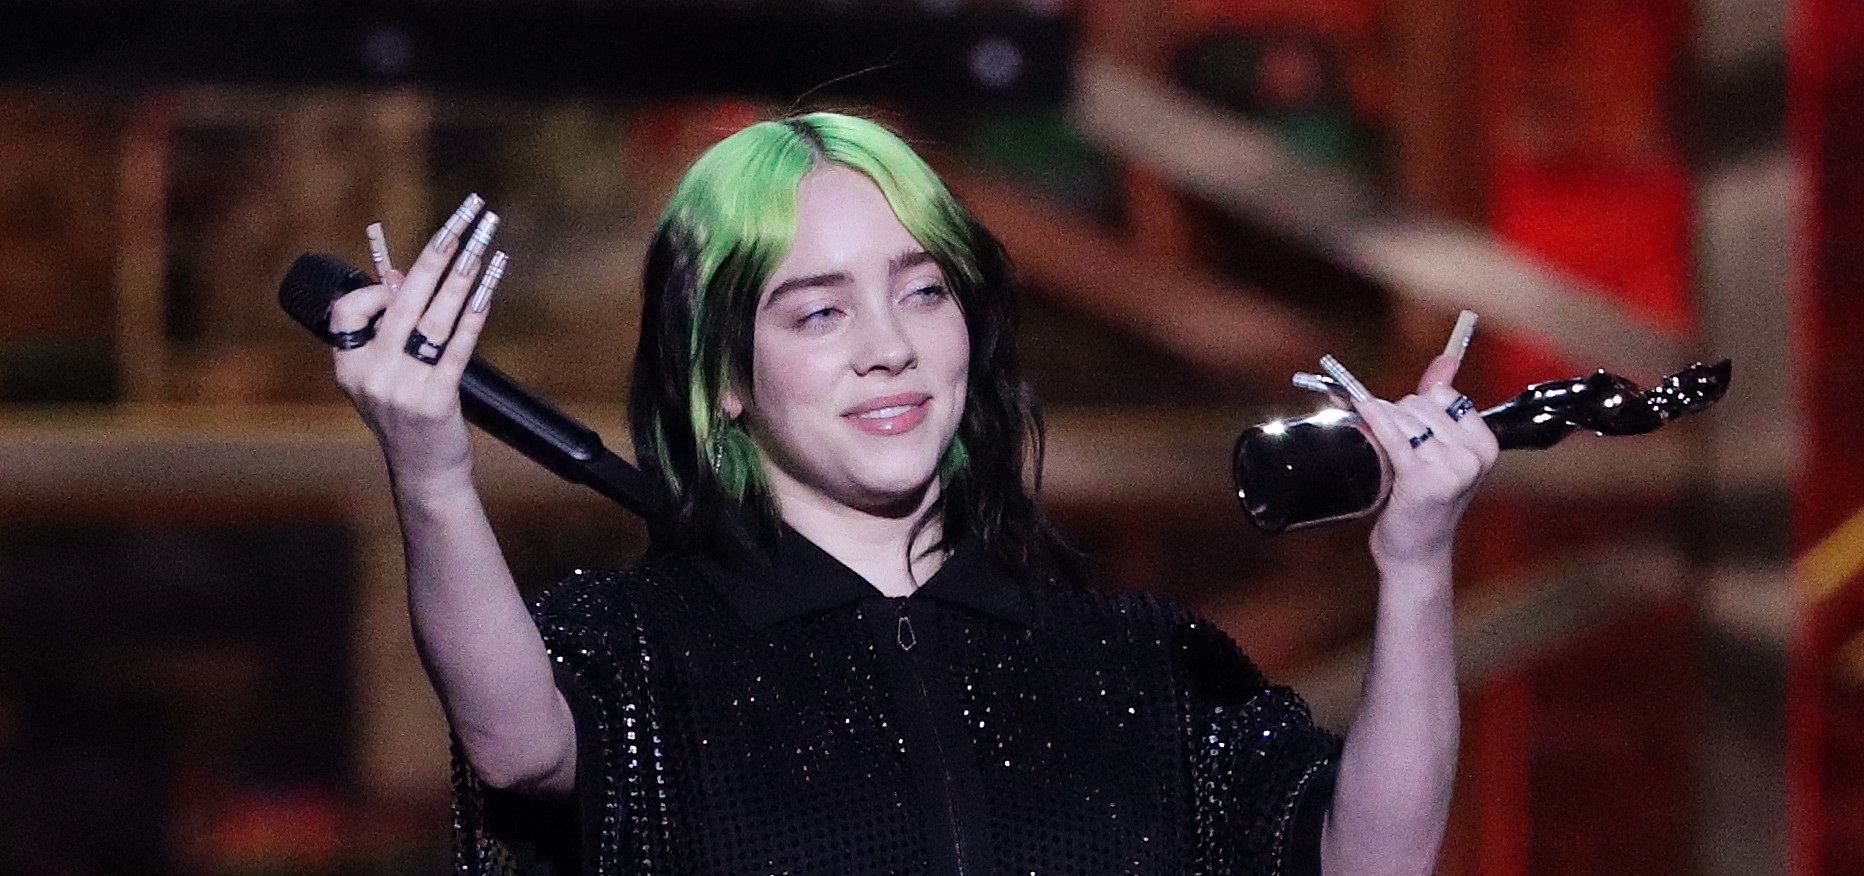 Billie Eilish Has Earned Her First UK #1 with New James Bond Song – ‘No Time To Die’